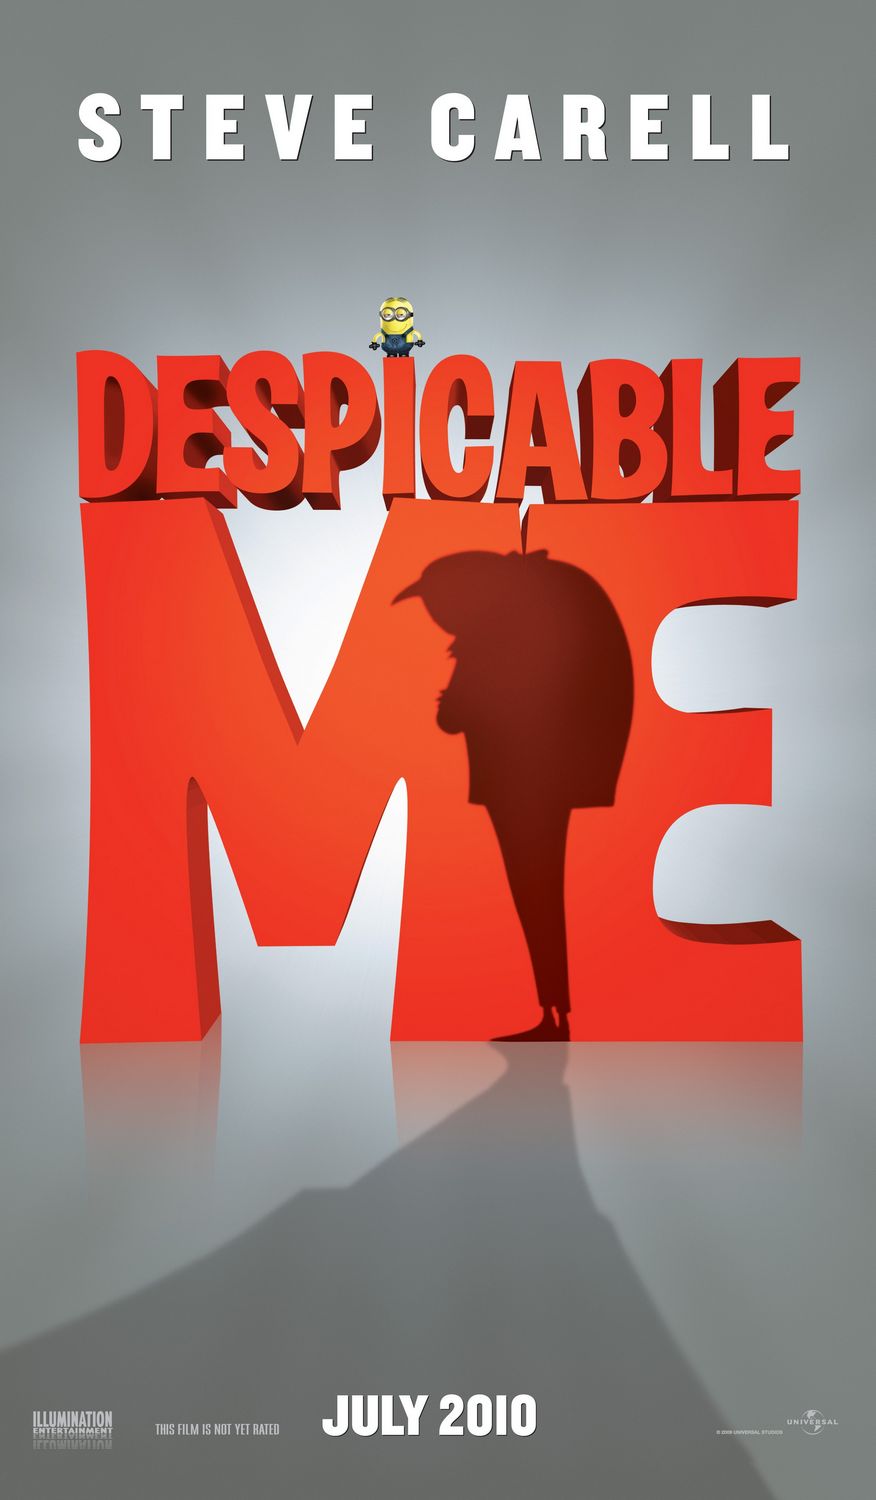 Despicable Me (#2 of 21): Extra Large Movie Poster Image - IMP Awards